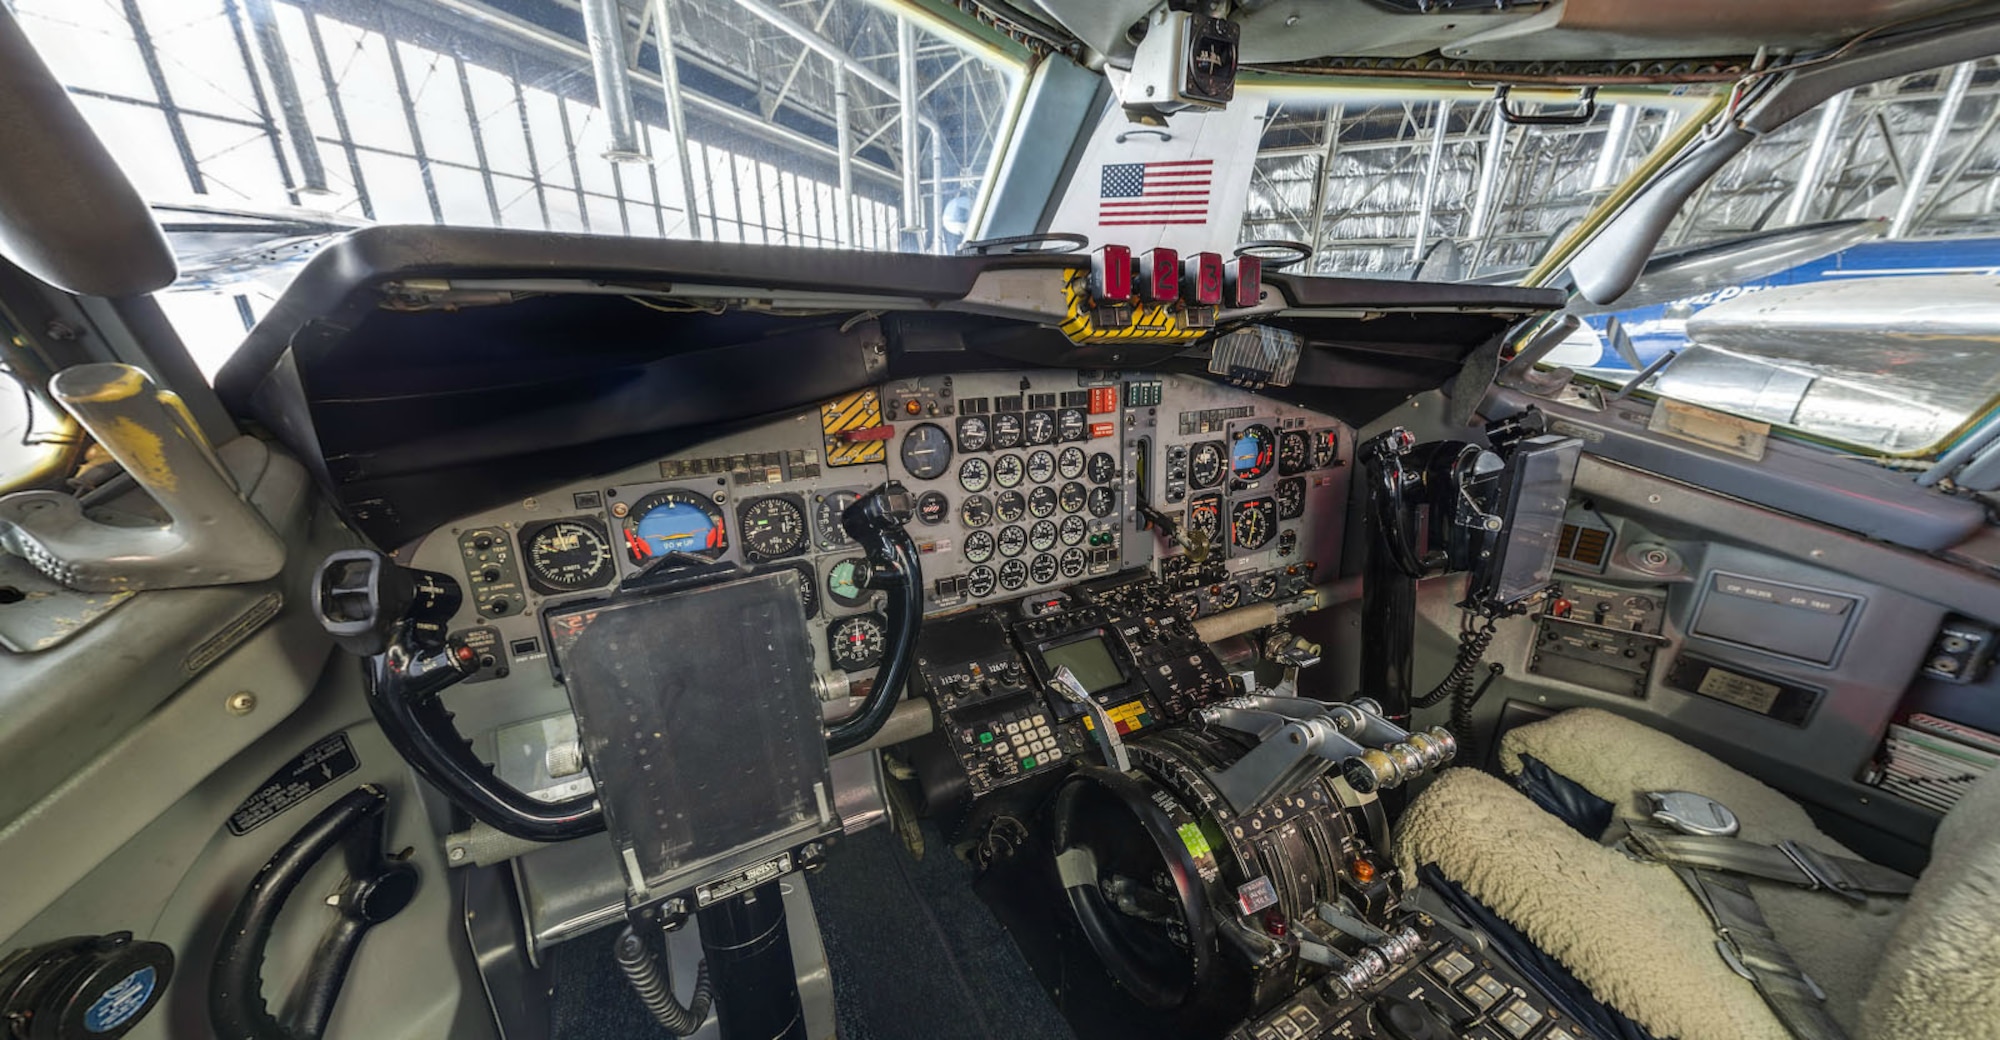 DAYTON, Ohio -- Pilot's station of Boeing VC-137C SAM 26000 (Air Force One) at the National Museum of the U.S. Air Force. This photo is part of the free ACI Cockpit360º app, which features high-definition panoramic photos of more than 20 cockpits from many well-known aircraft on display at the National Museum of the U.S. Air Force. (Photo courtesy of Lyle Jansma, Aerocapture Images)